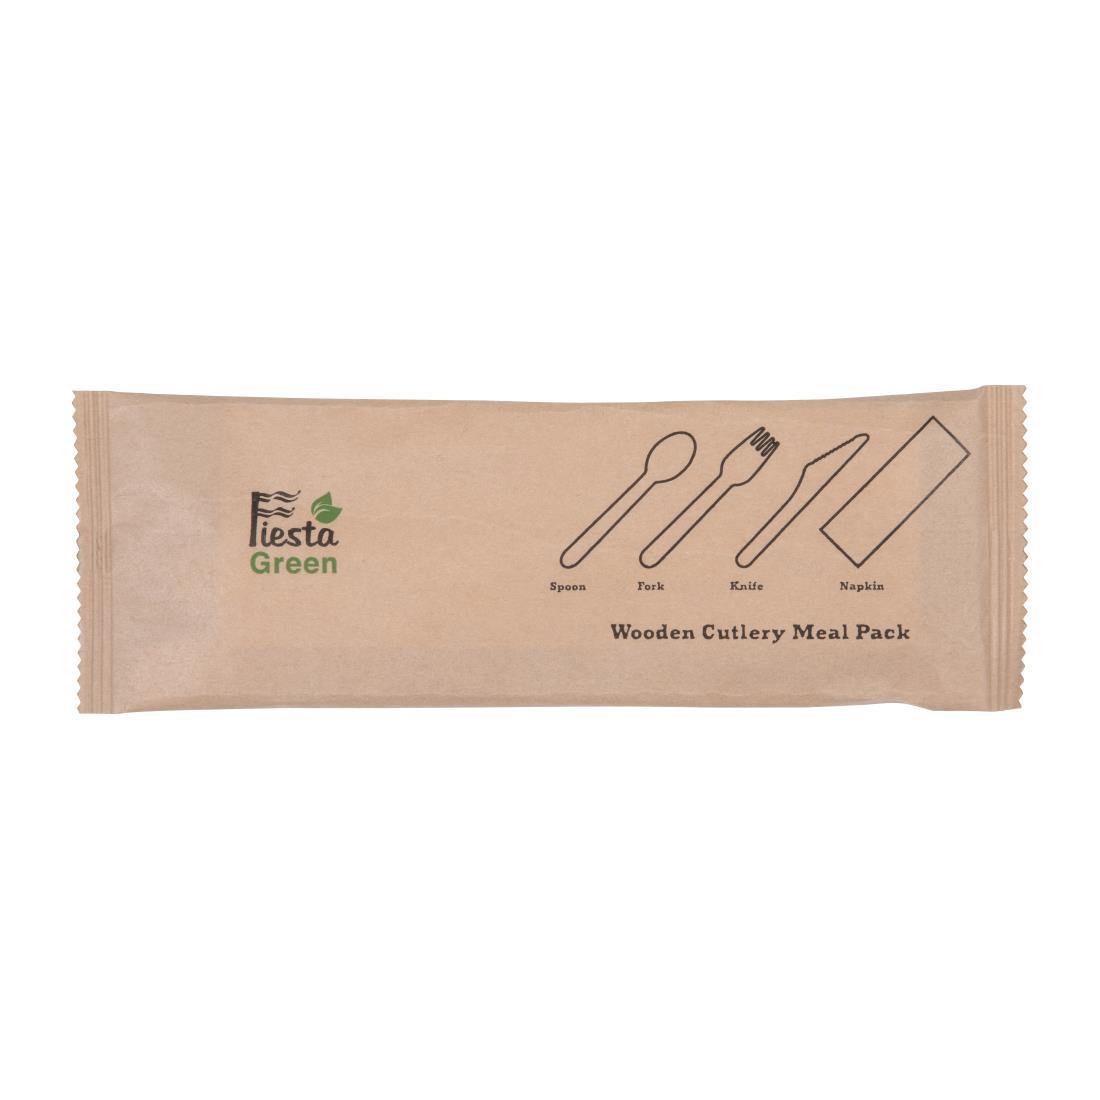 Fiesta Compostable Wooden Cutlery Meal Pack (Pack of 250) - DF422  - 2